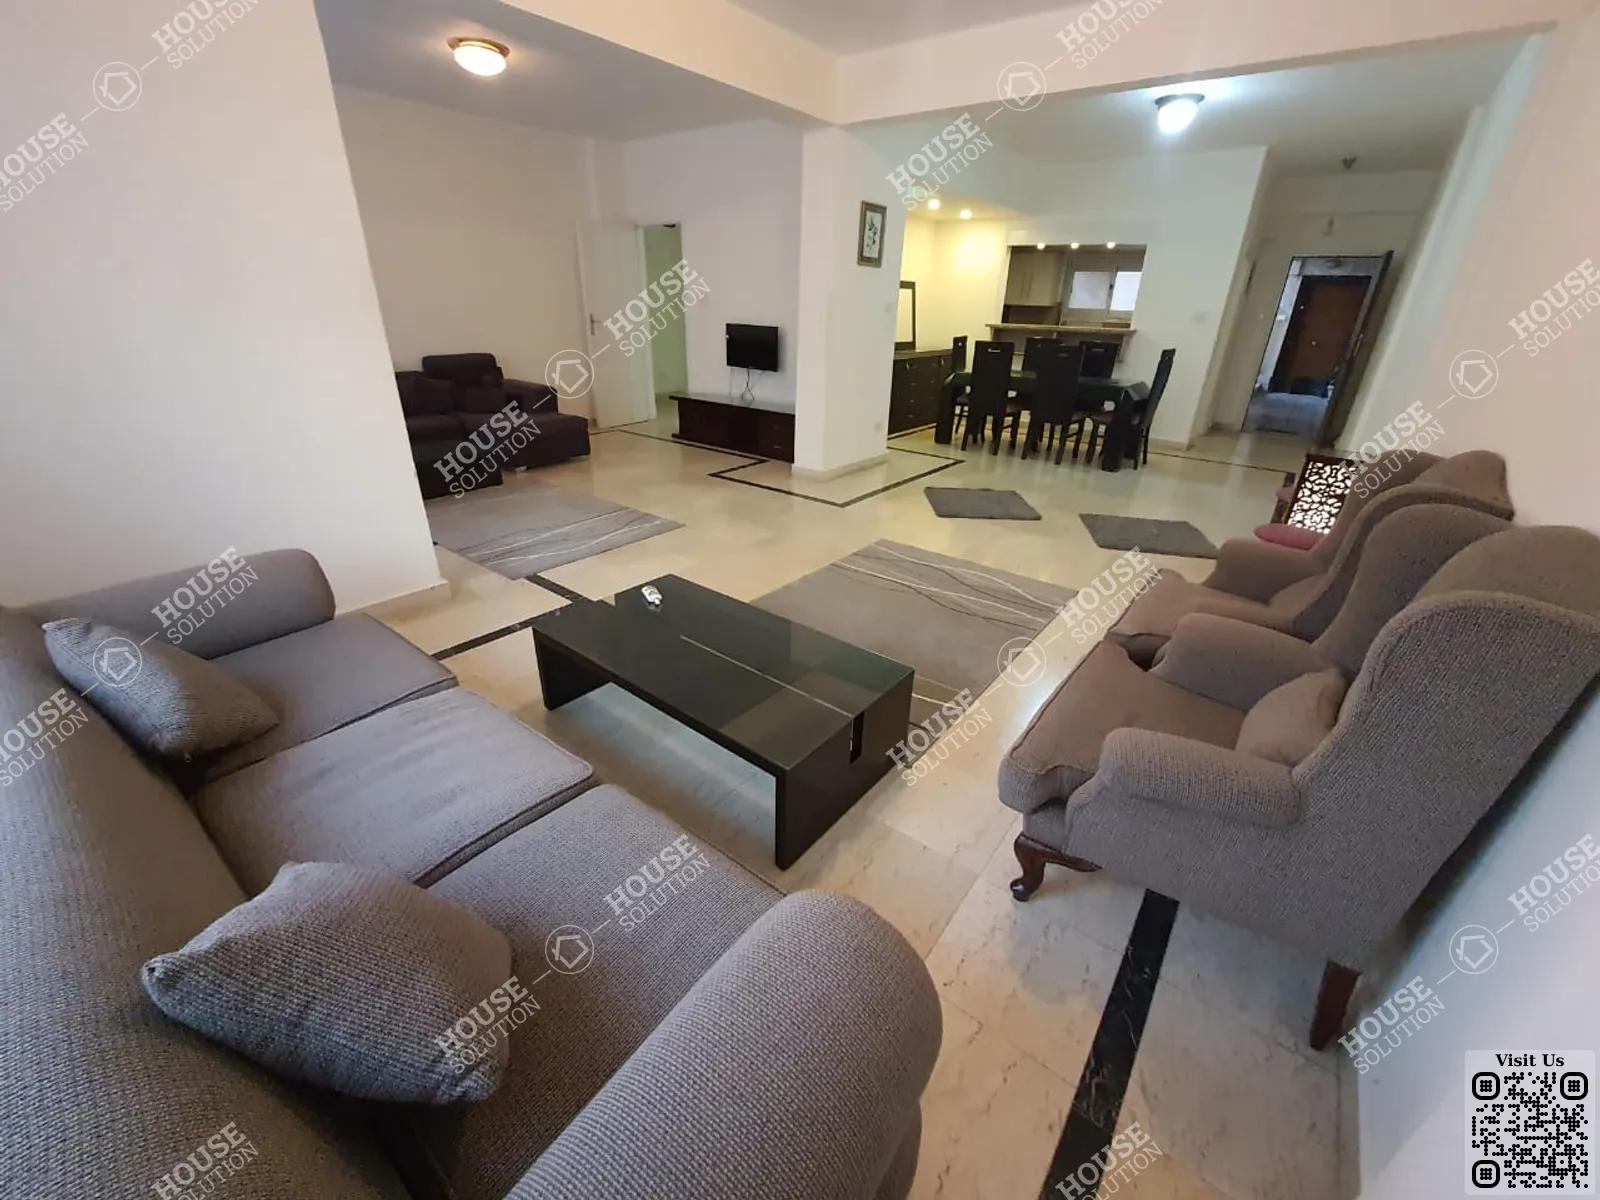 RECEPTION  @ Apartments For Rent In Maadi Maadi Sarayat Area: 150 m² consists of 2 Bedrooms 2 Bathrooms Furnished 5 stars #3527-2